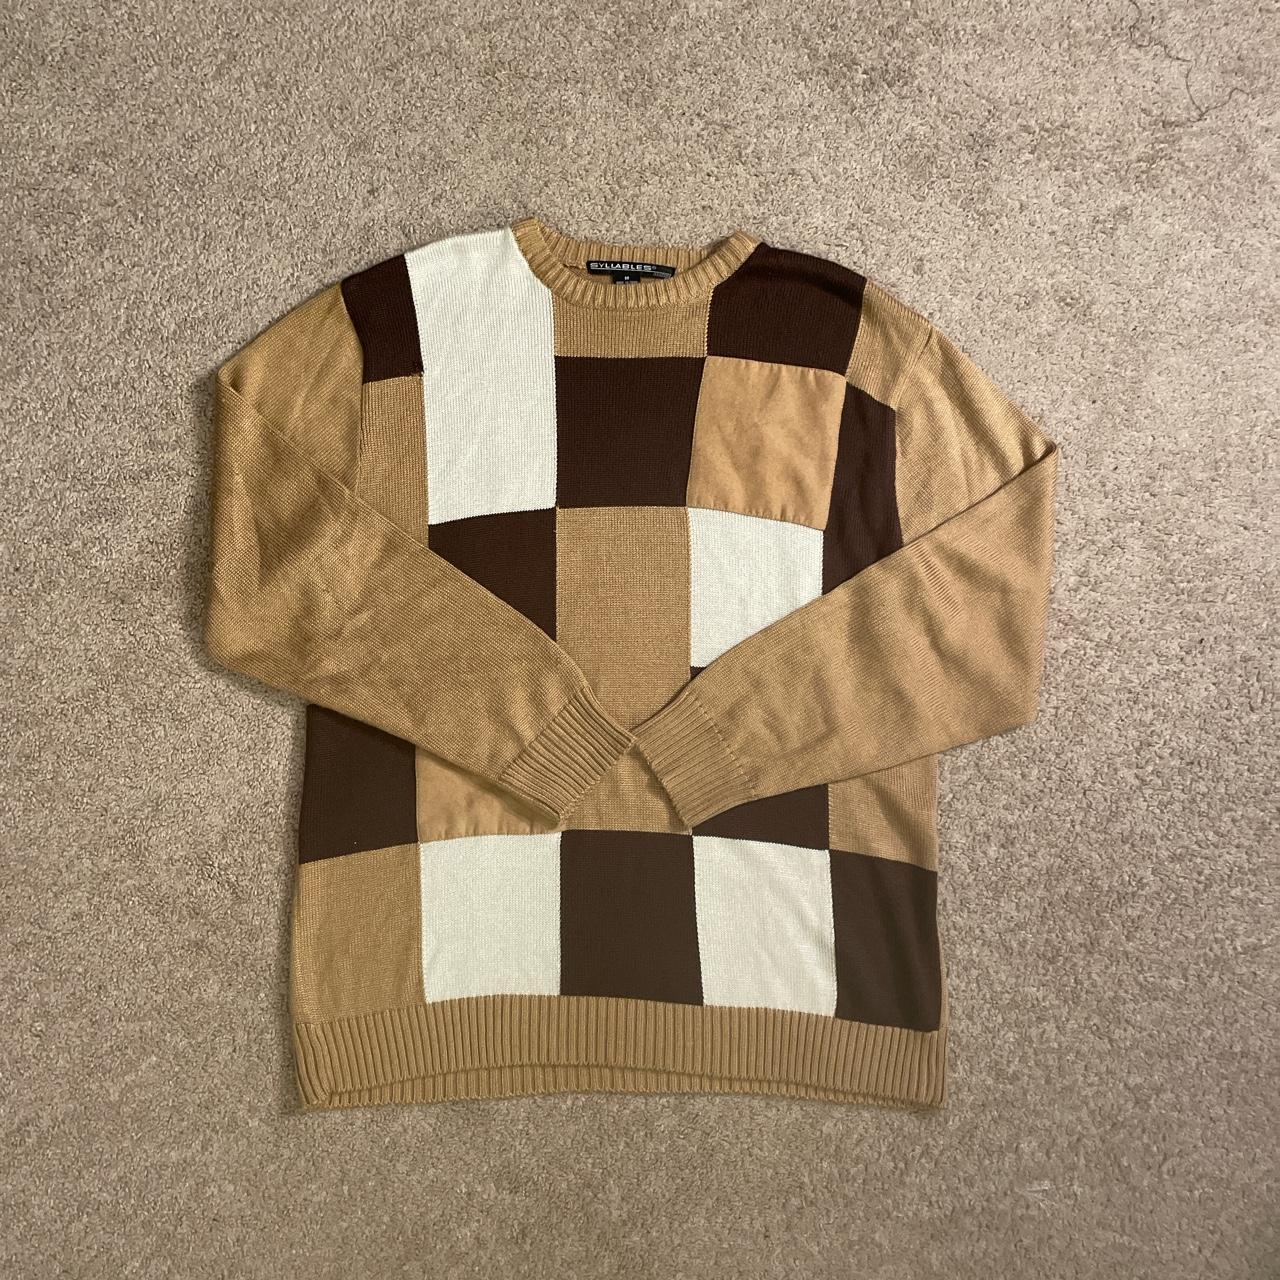 Union Bay Men's Tan and Brown Jumper